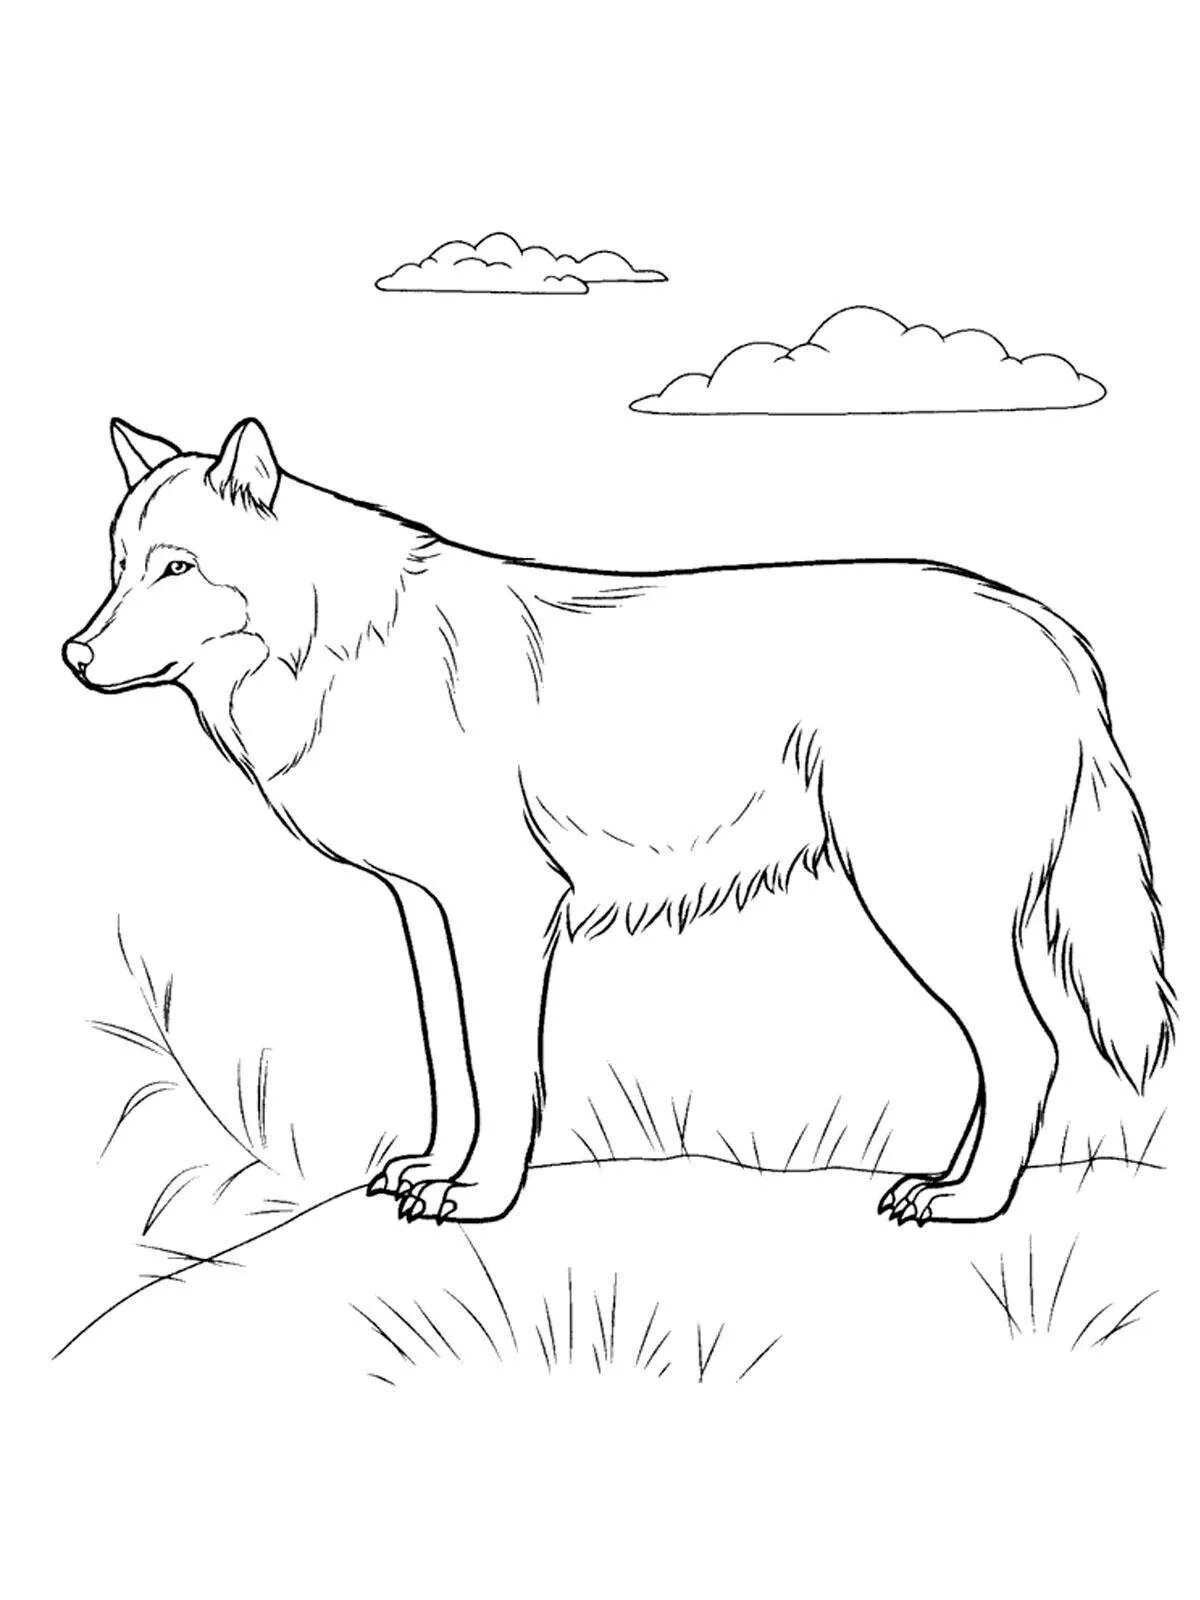 Crazy wild animal coloring pages for kids